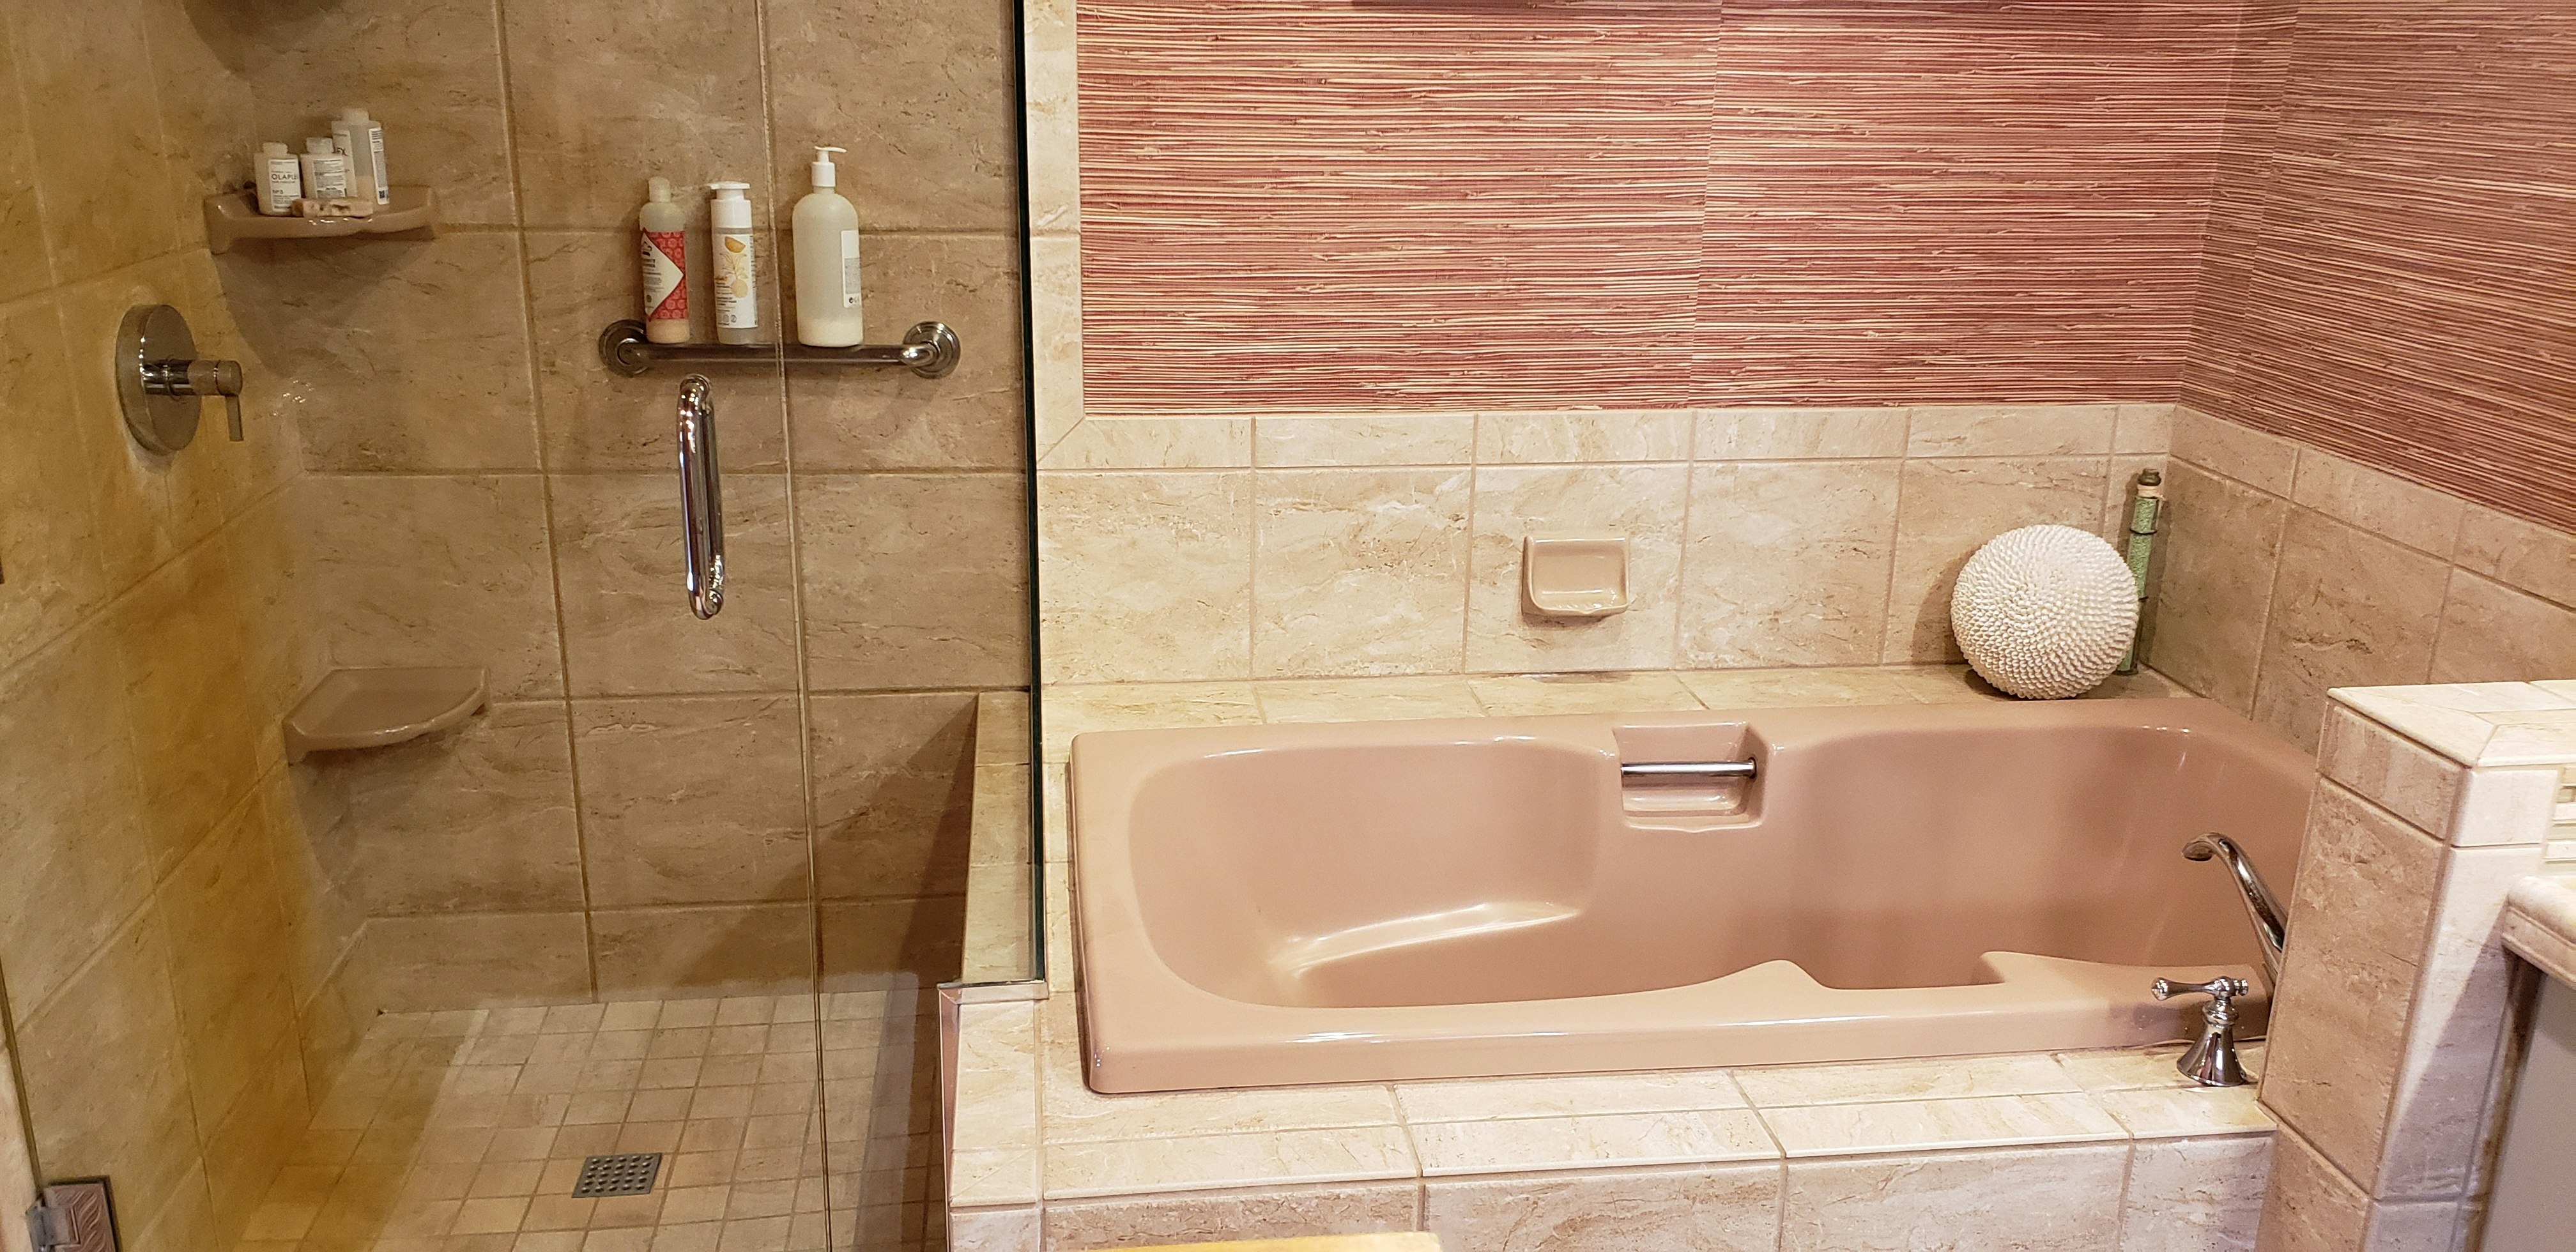 There is space for a relaxing bath or shower, whichever you prefer.